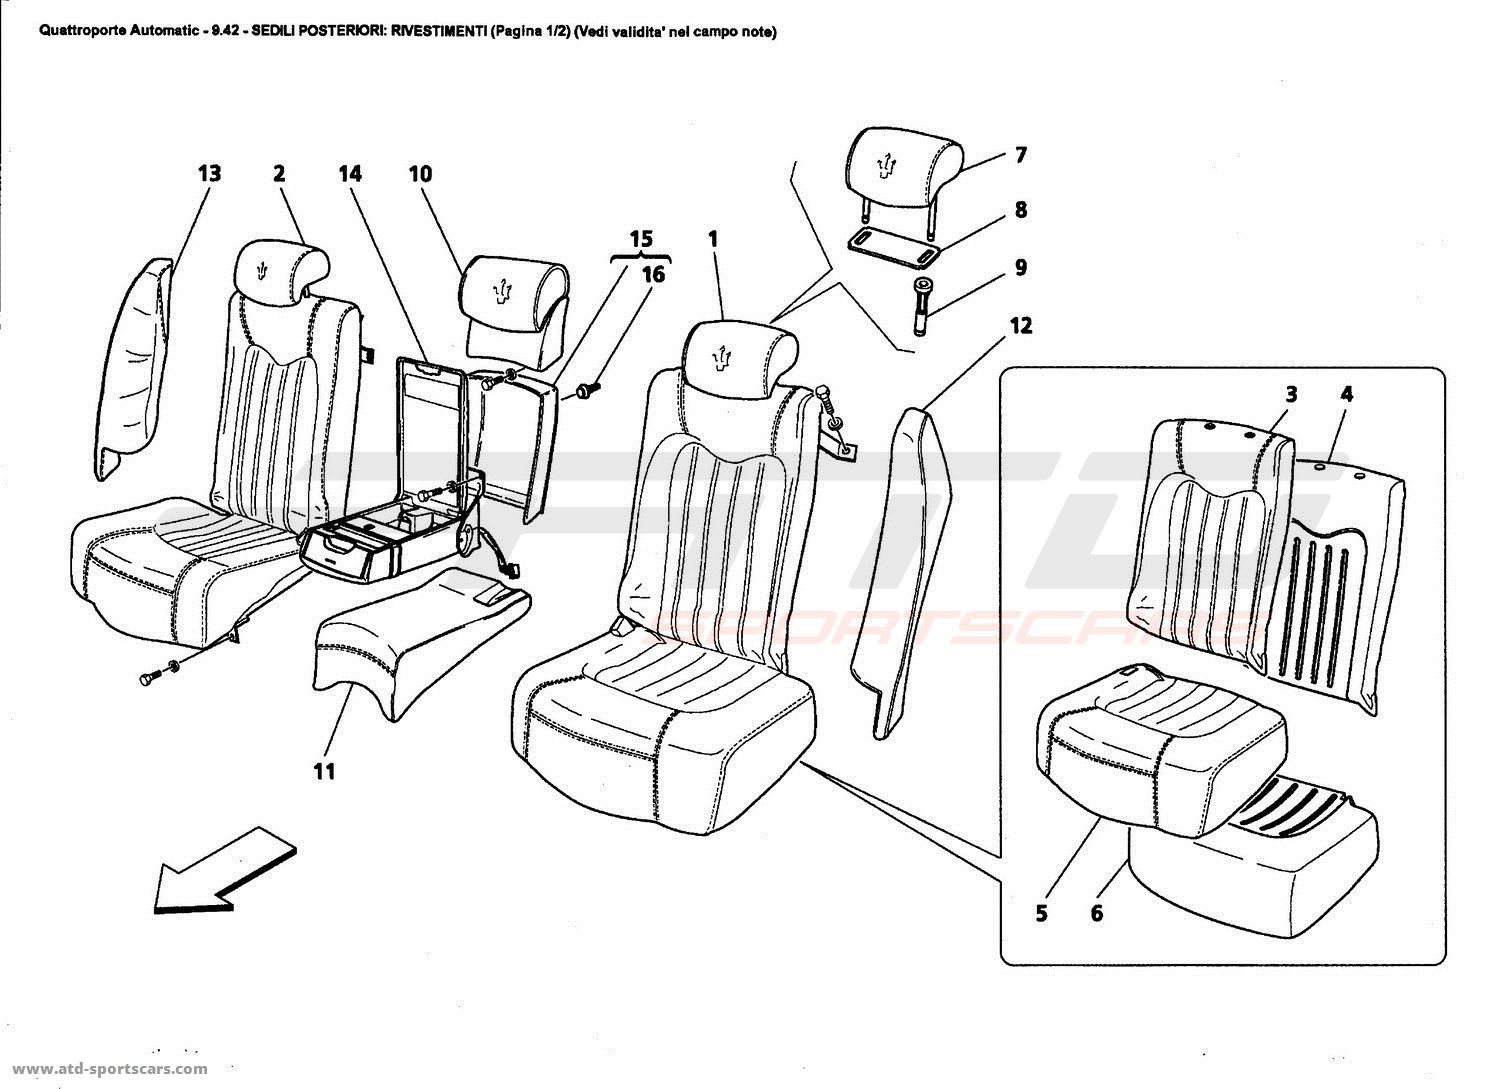 REAR SEATS: LININGS (Page 1/2) (See validity on note field)